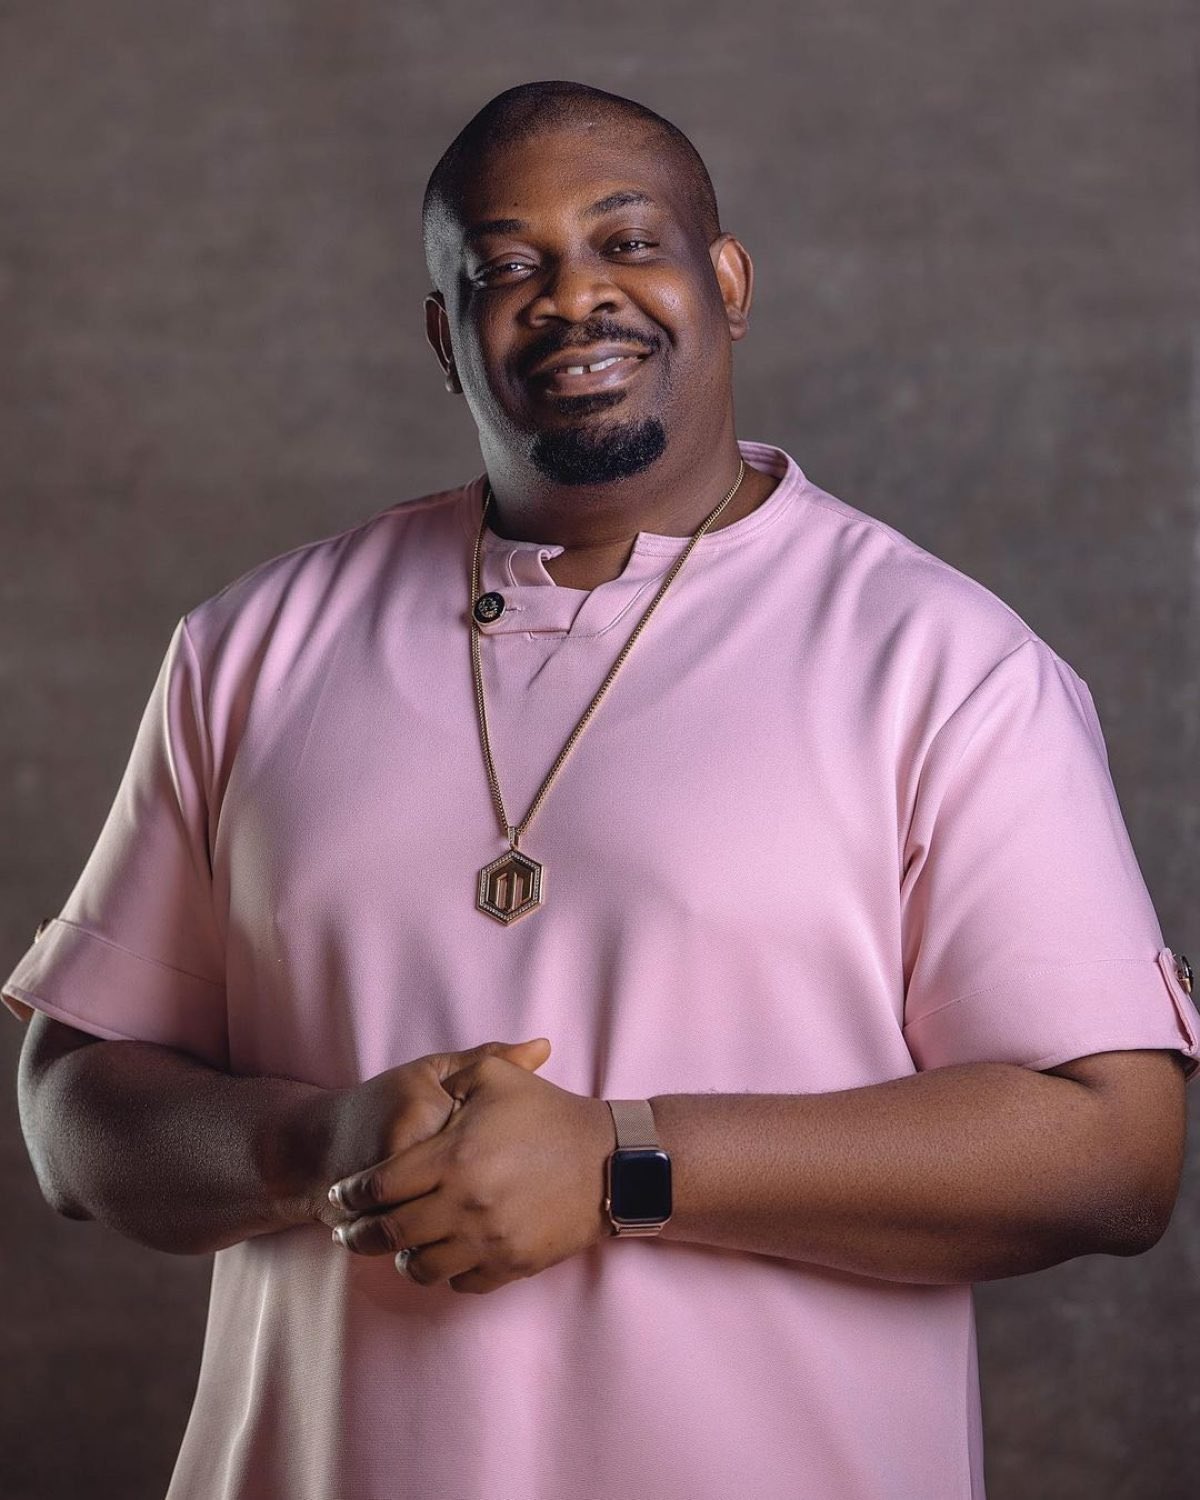 Happy birthday Boss Don Jazzy 
An ESOCS member wishing you a better life 